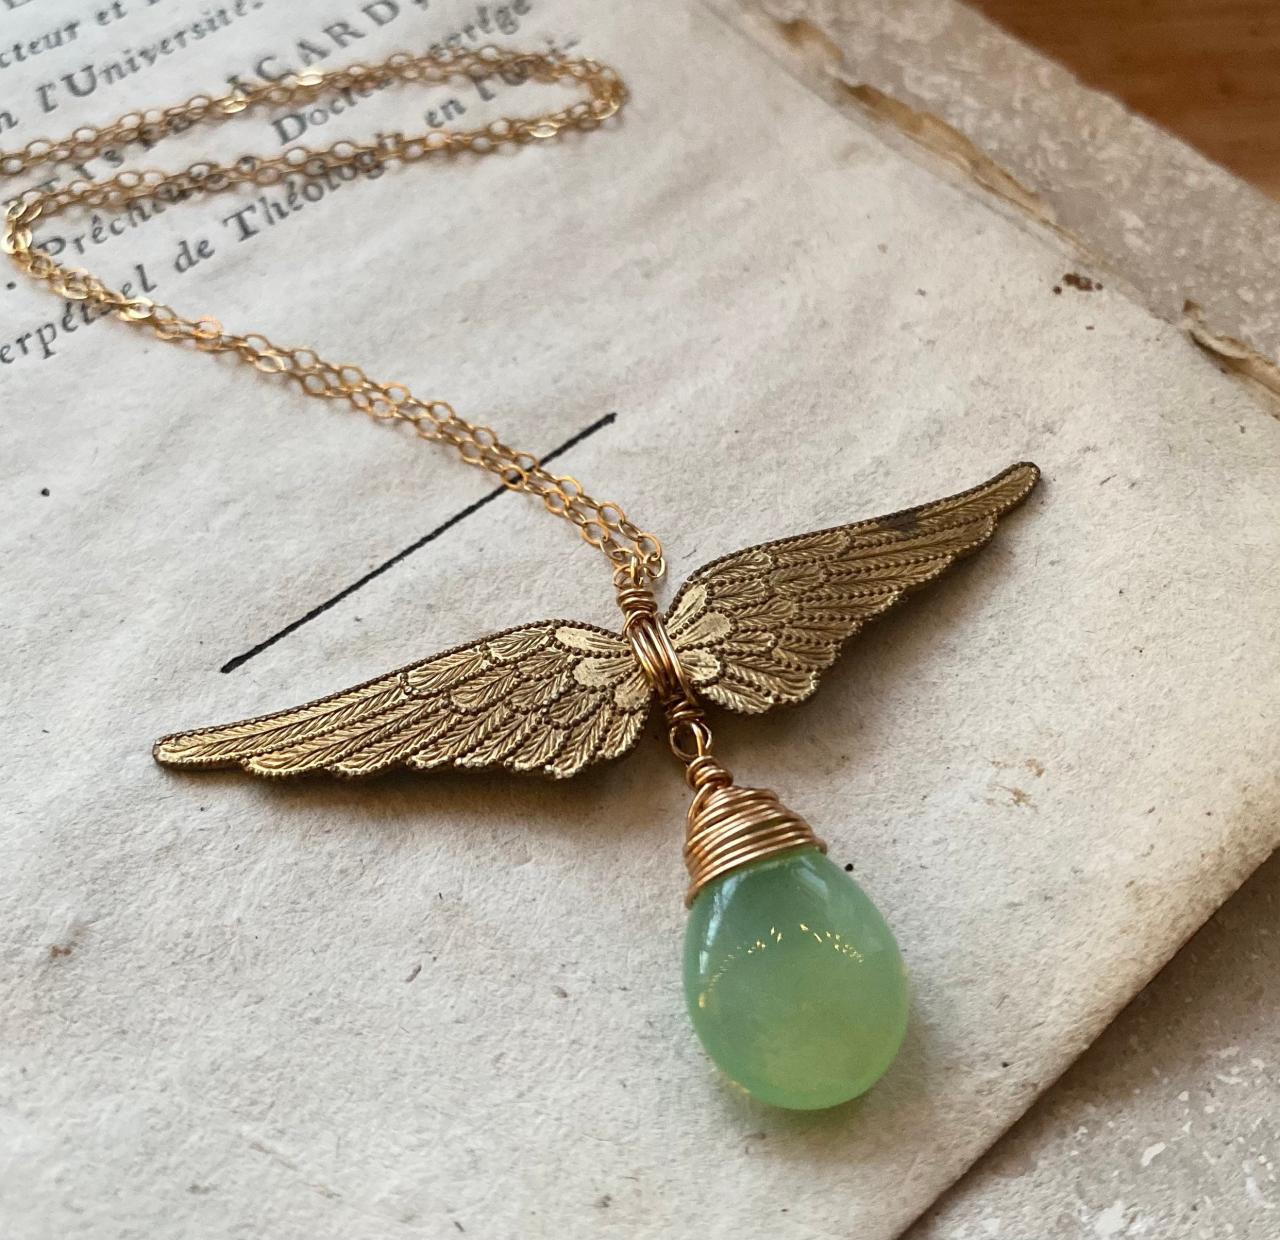 Winged Victory Necklace Raw Brass Pendant Jewelry Mint Green Vintage Style Gold Wing Necklace Art Nouveau Wire Wrapped Chain